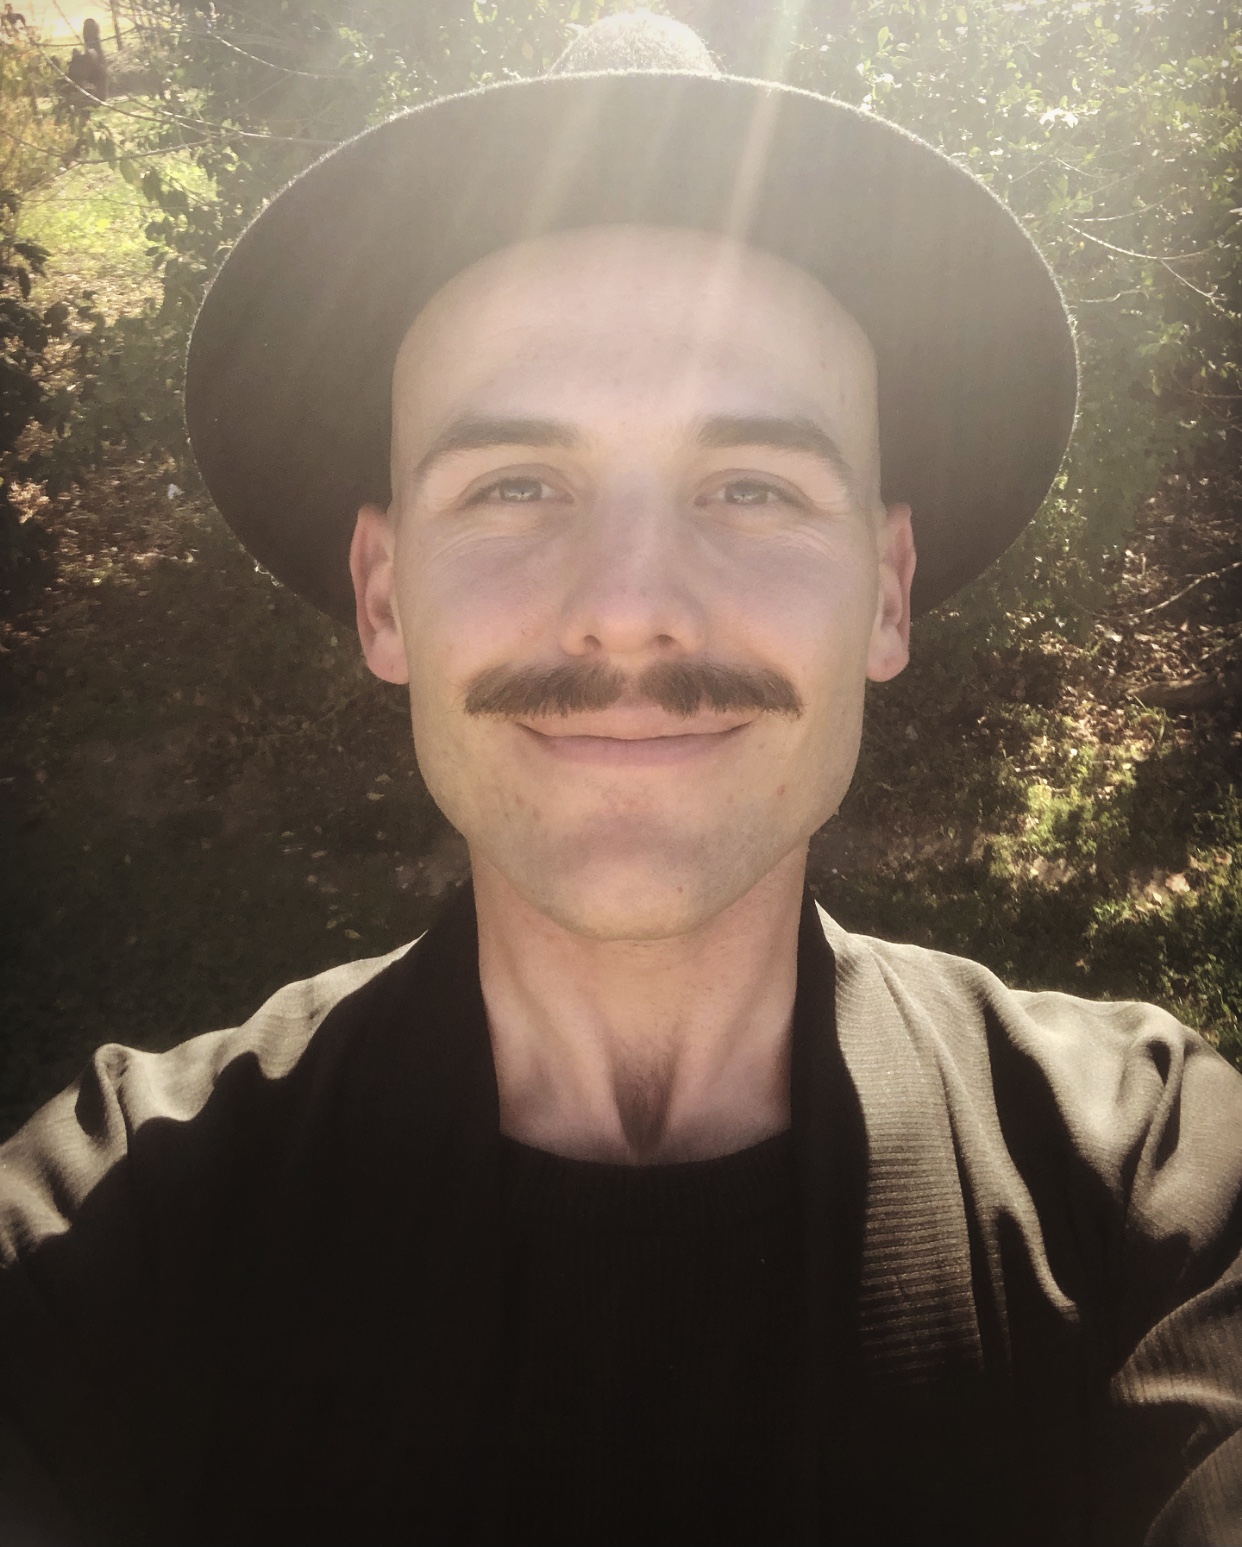 A selfie of Darby Jones, who is wearing a black jacket and hat. He is smiling at the camera with sun and a tree behind him.